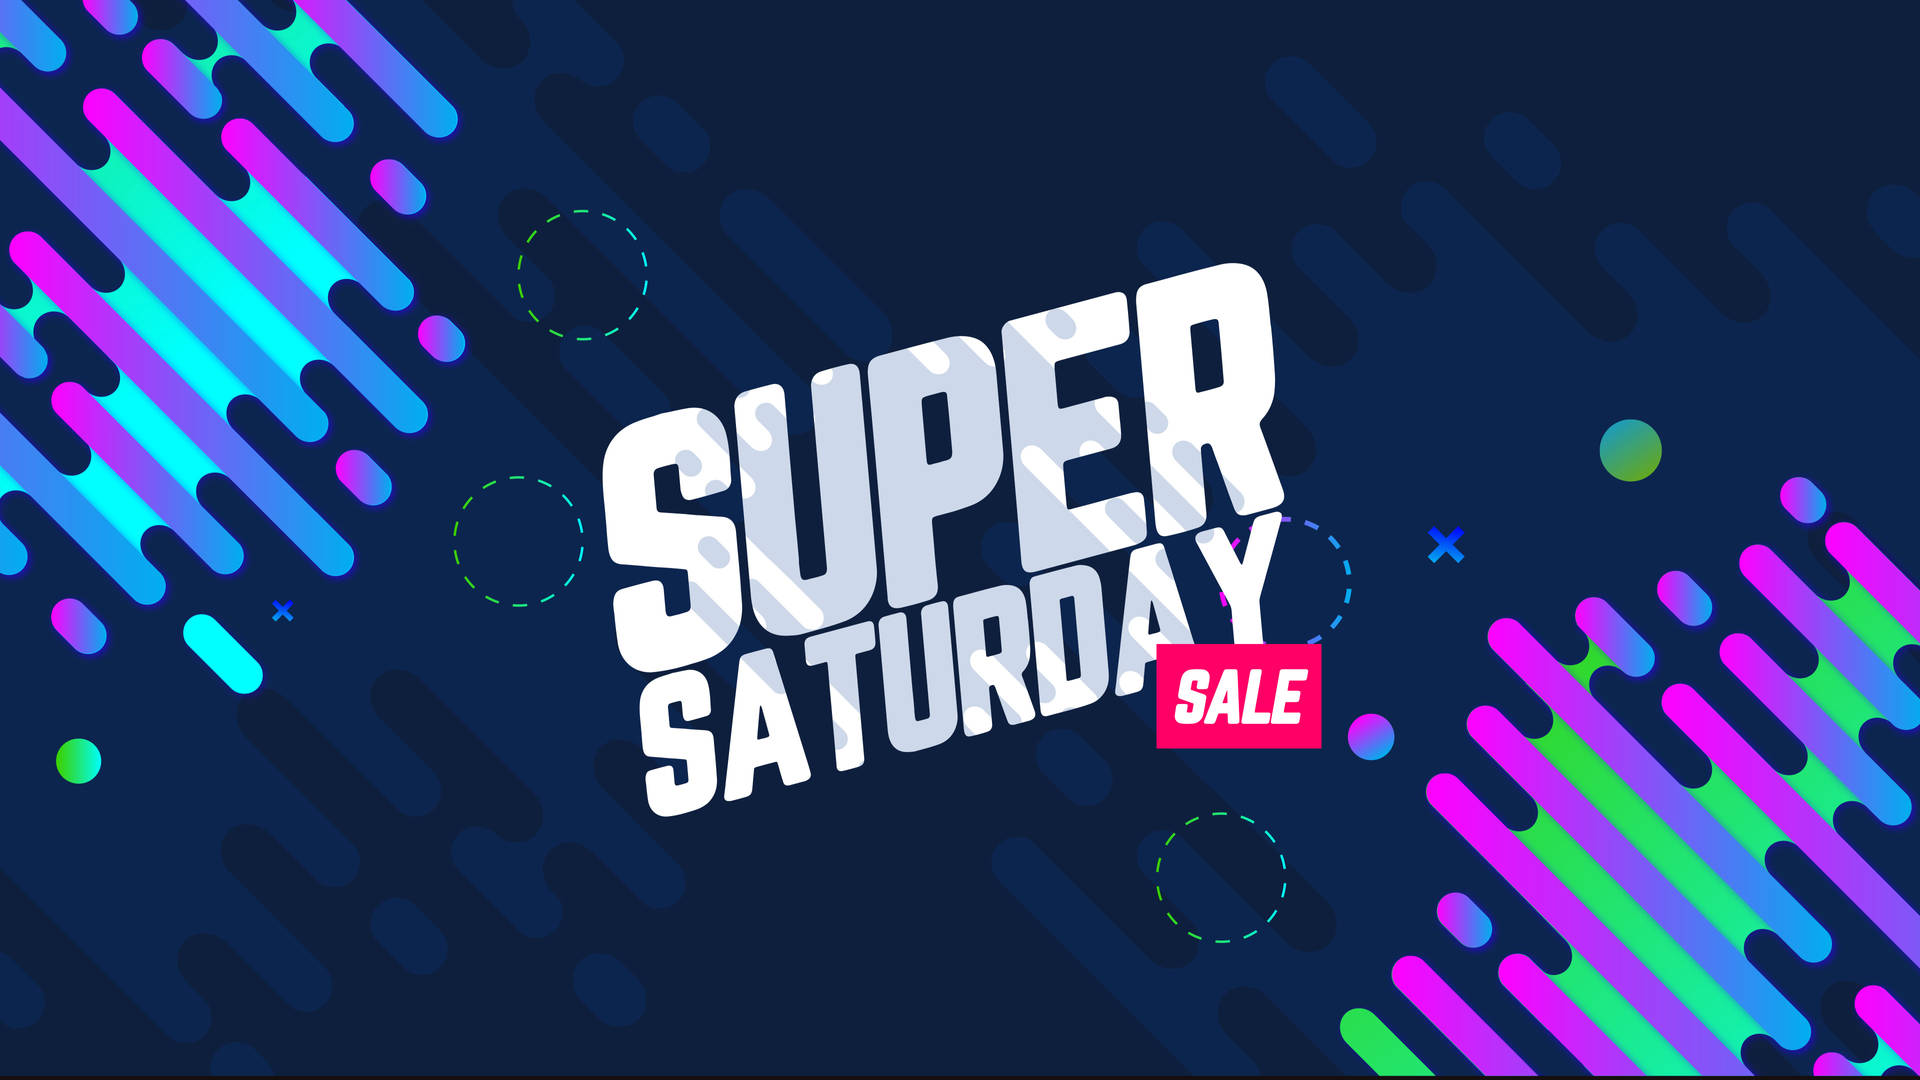 Exciting Super Saturday Sale Over A Dramatic Dark Blue Background